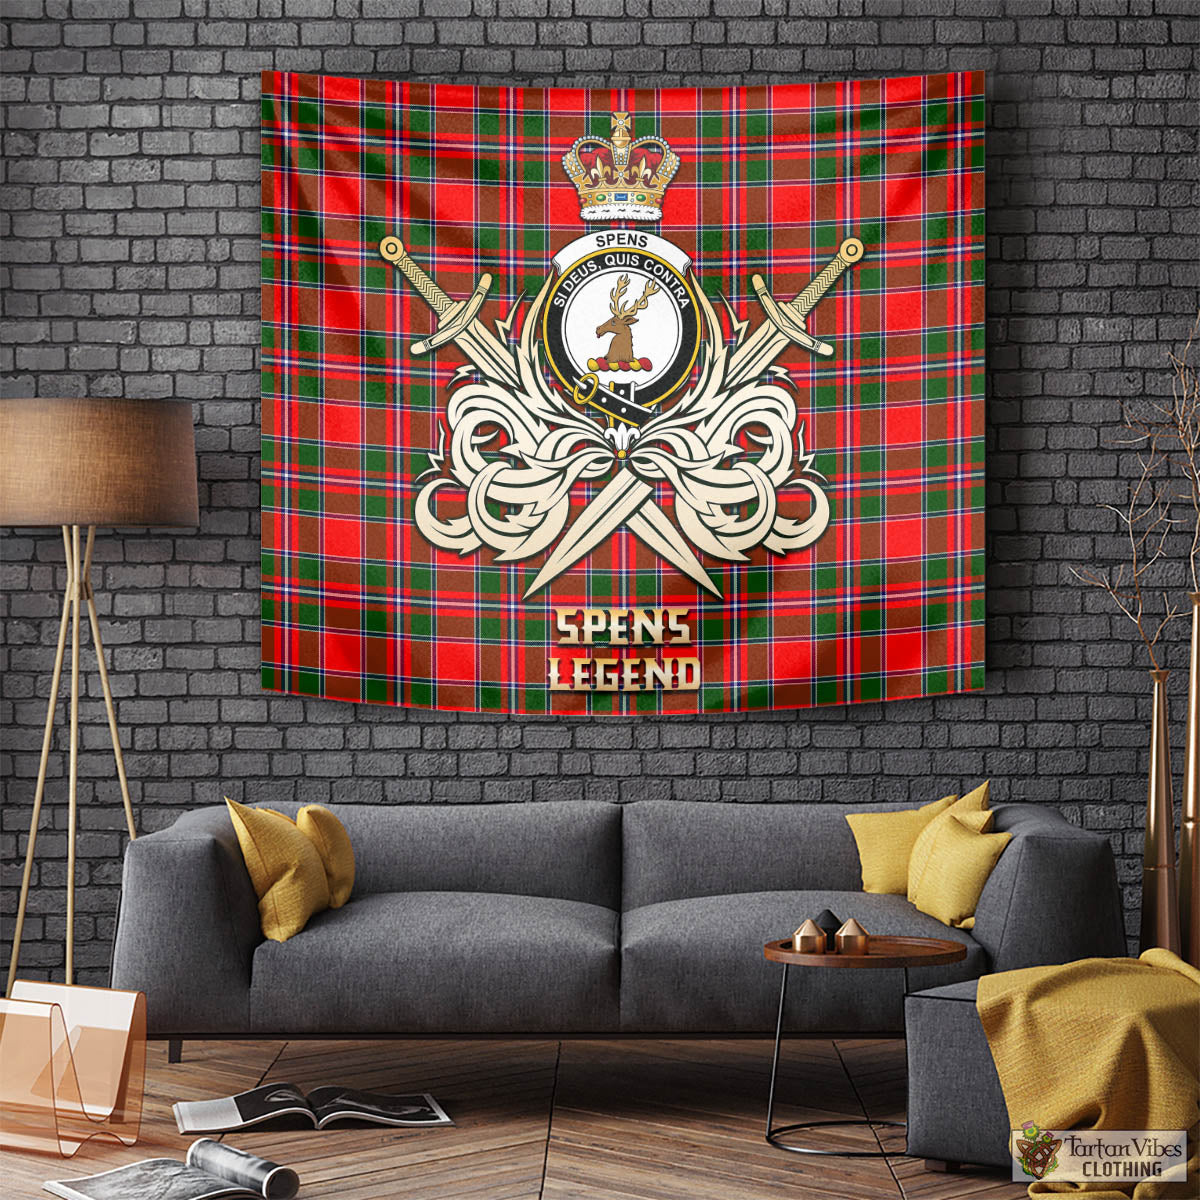 Tartan Vibes Clothing Spens Modern Tartan Tapestry with Clan Crest and the Golden Sword of Courageous Legacy